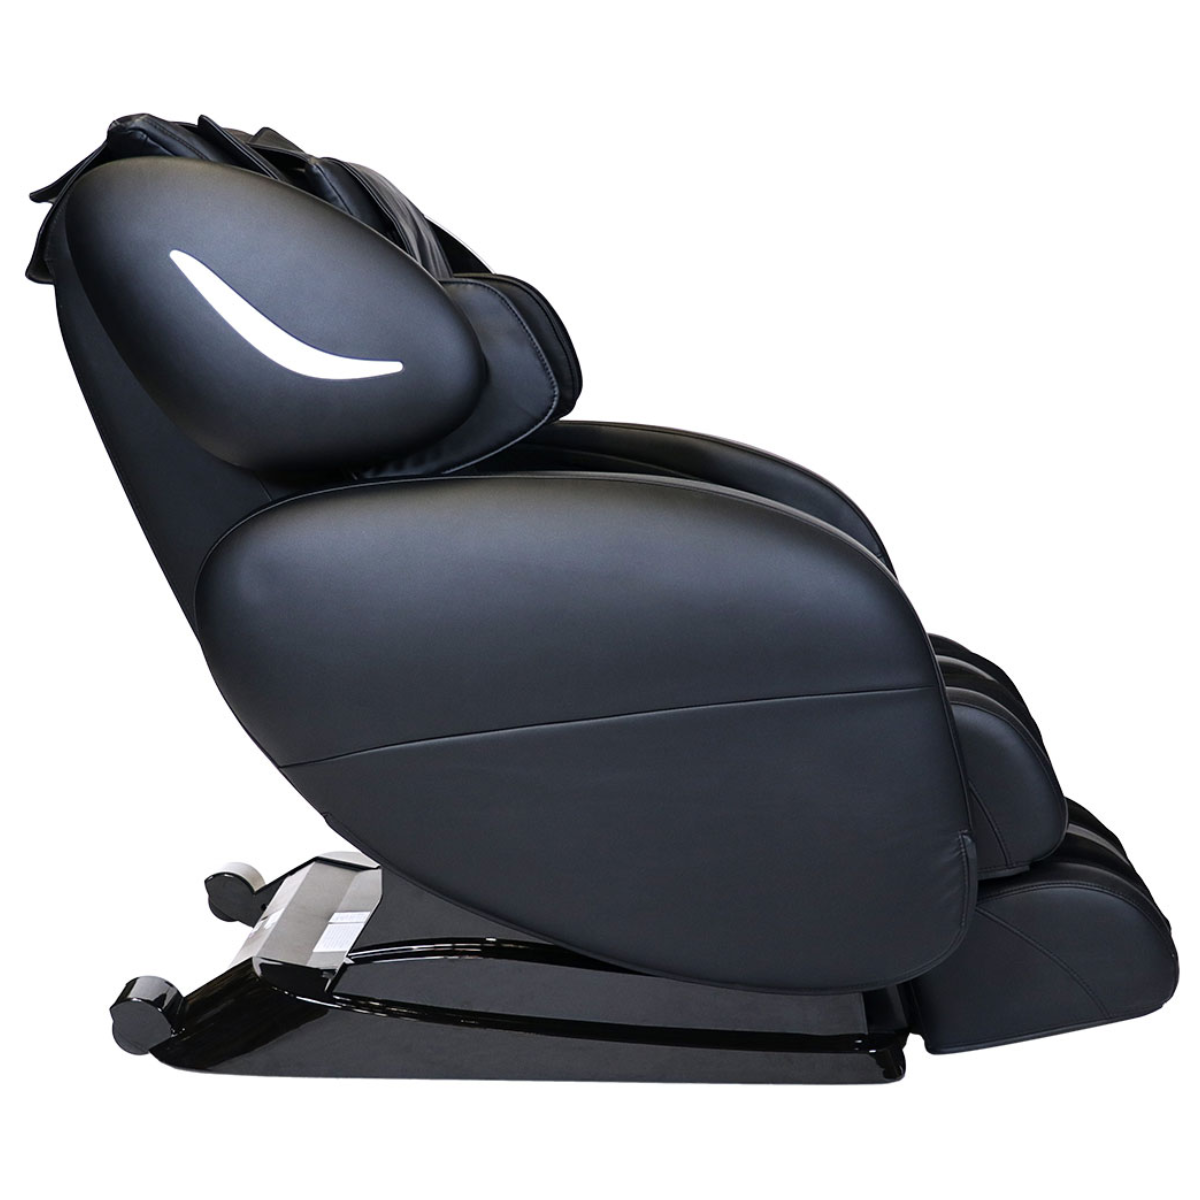 Infinity Smart Chair X3 3D/4D Massage Chair in Black - Home Bars USA